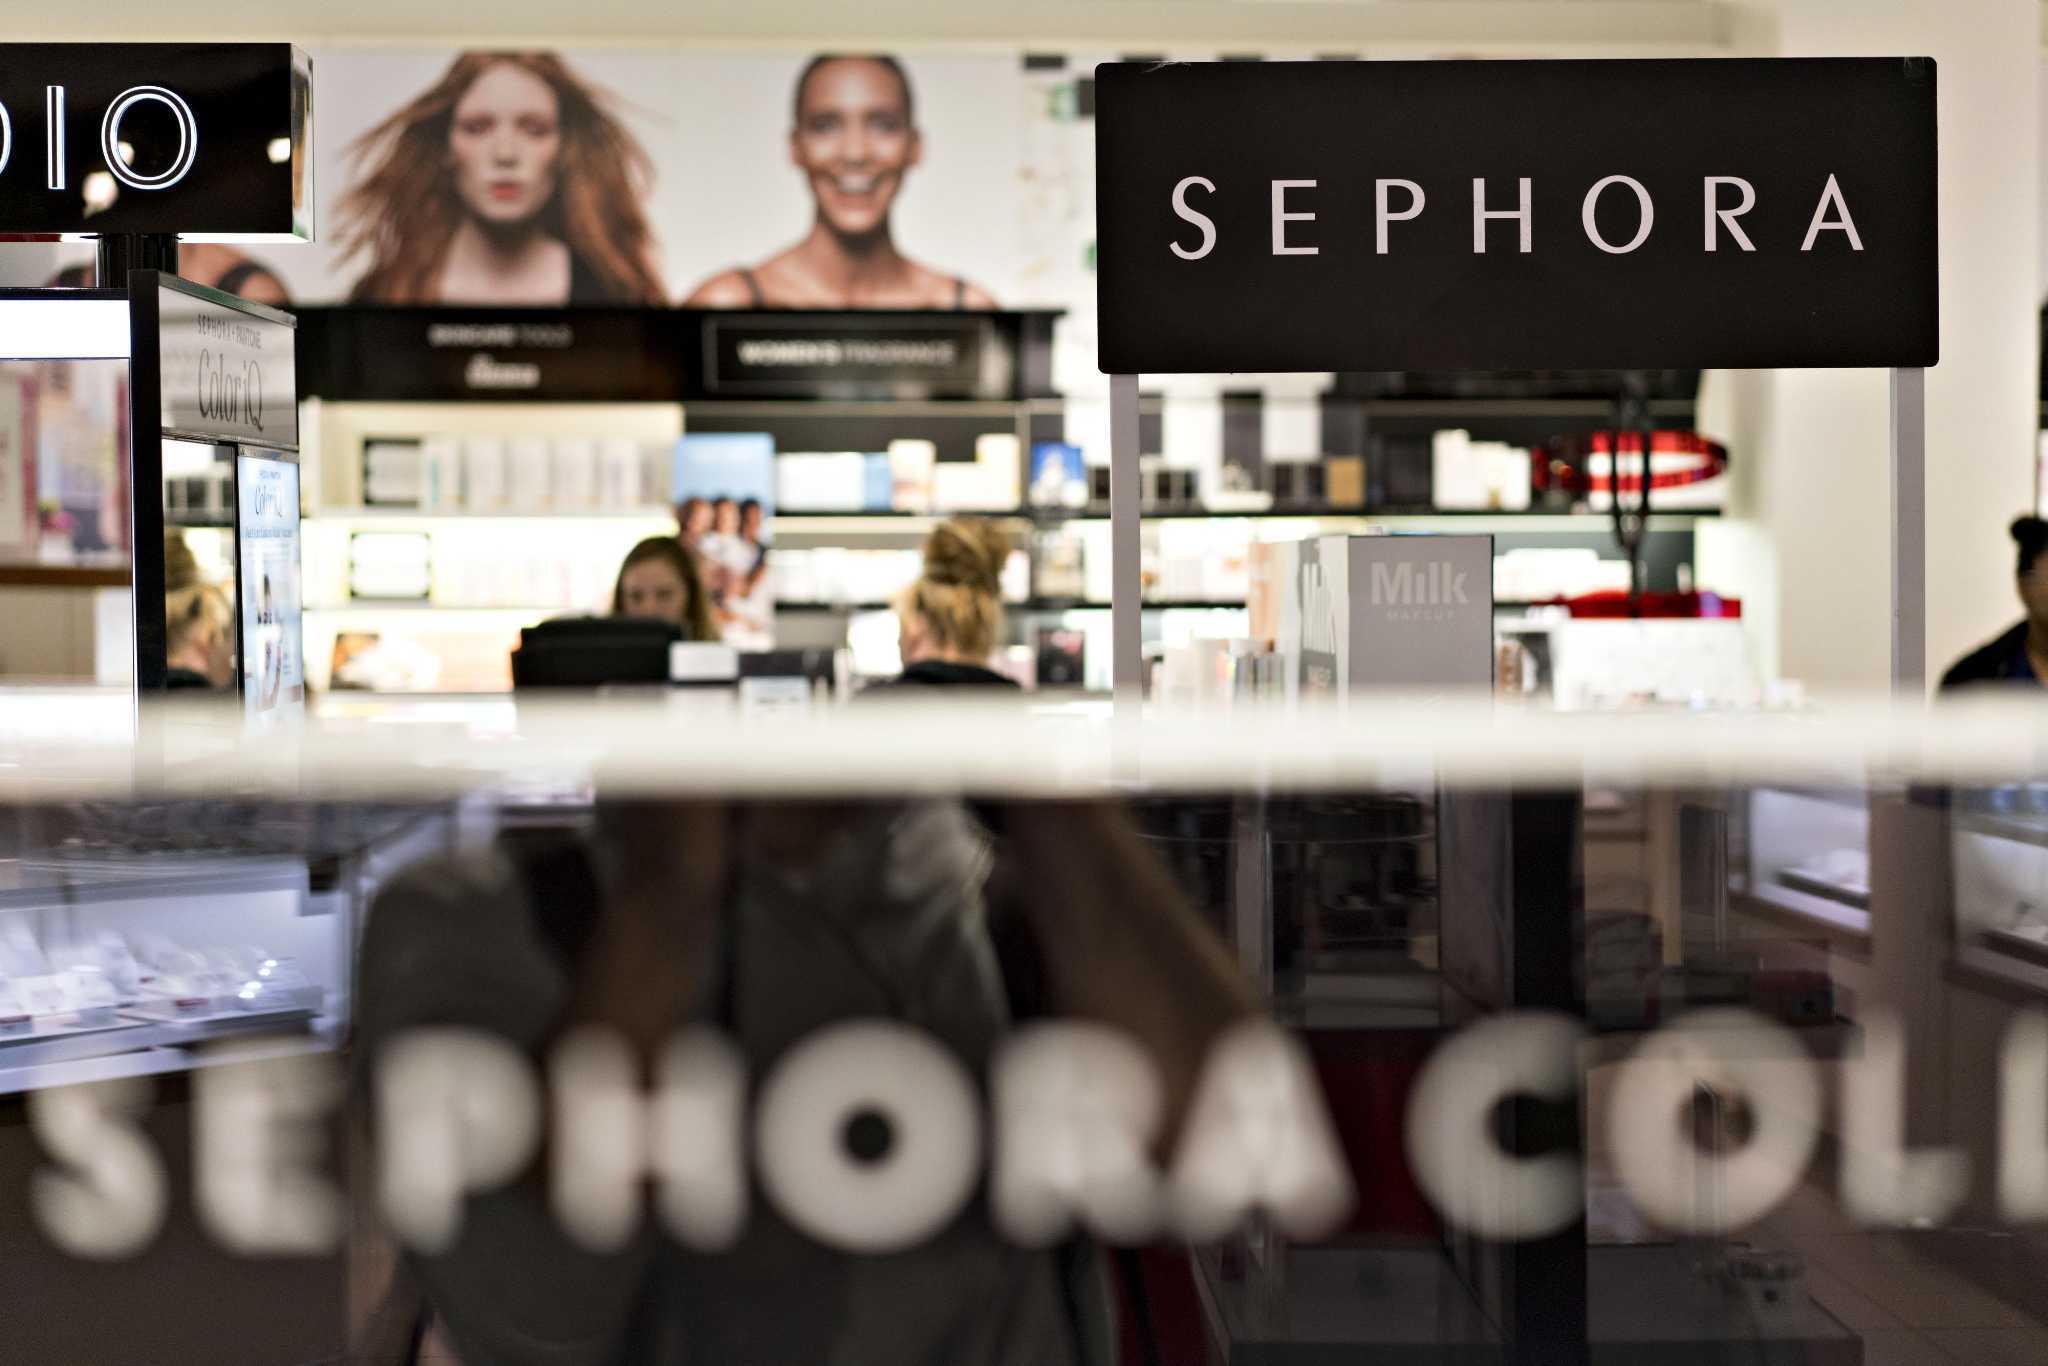 Get A Free Makeup Session At Sephora In These GCC Countries